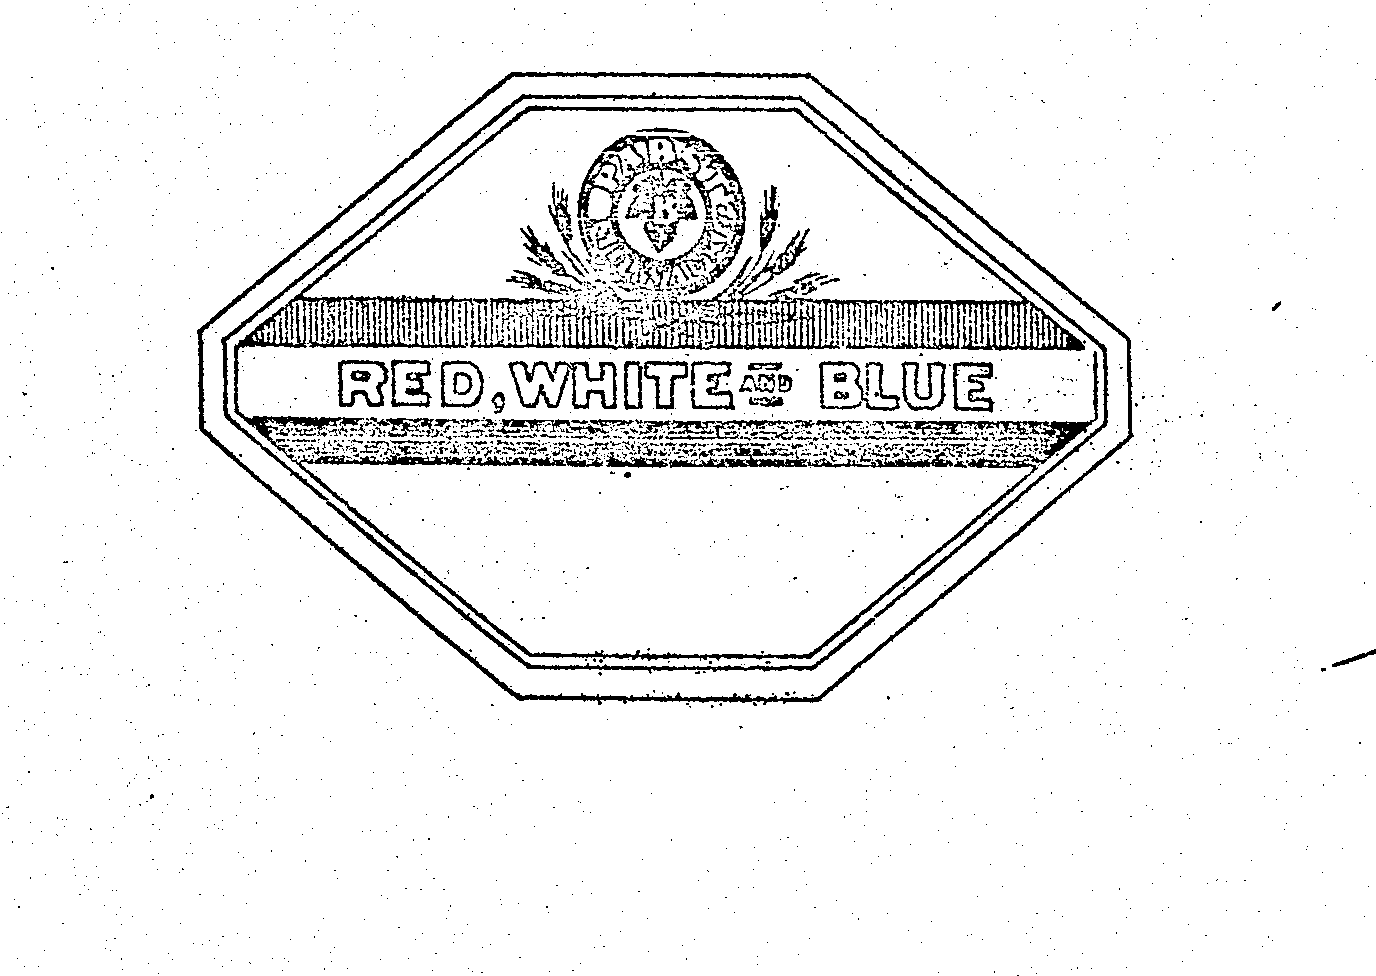  B PABST MILWAUKEE RED, WHITE AND BLUE